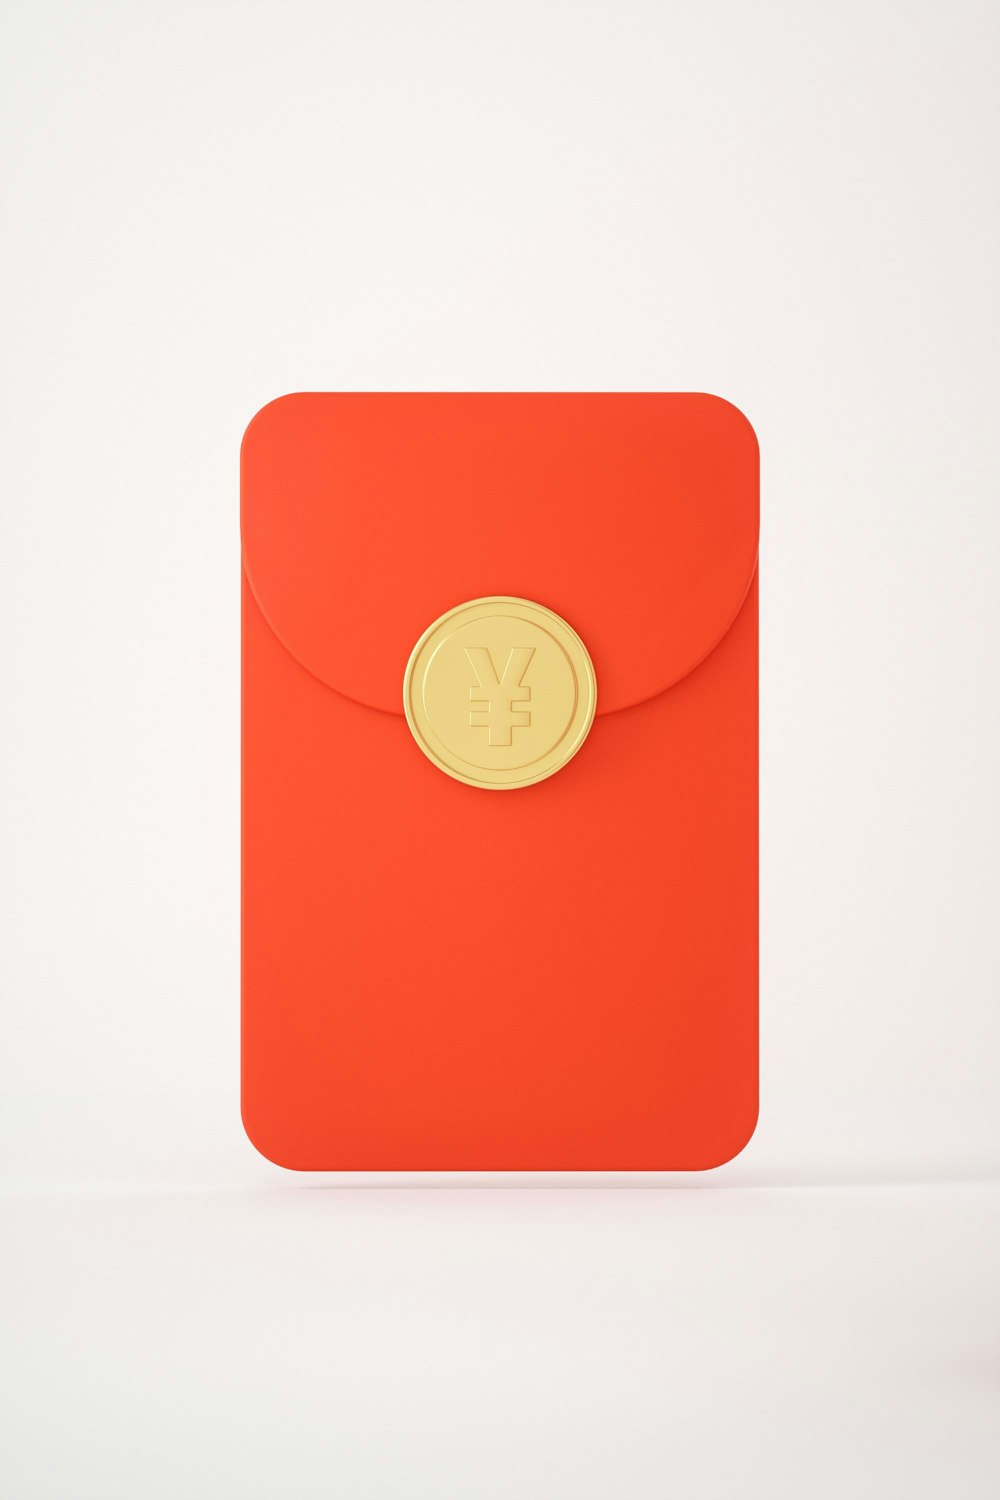 a red envelope with a gold button on it